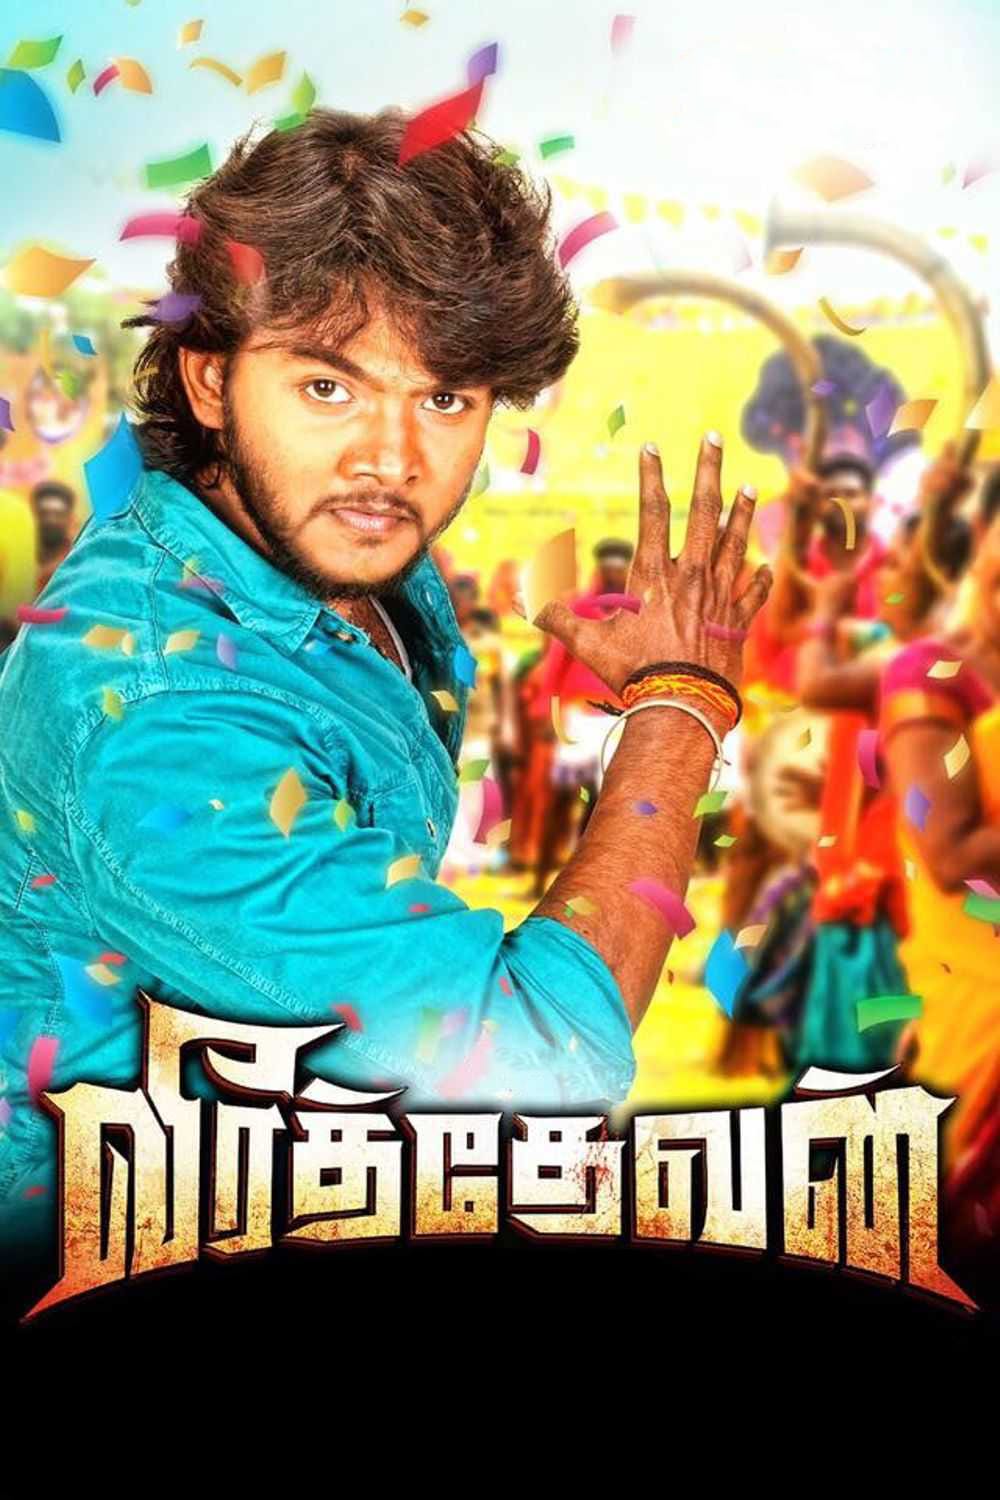 Poster for the movie "Veerathevan"